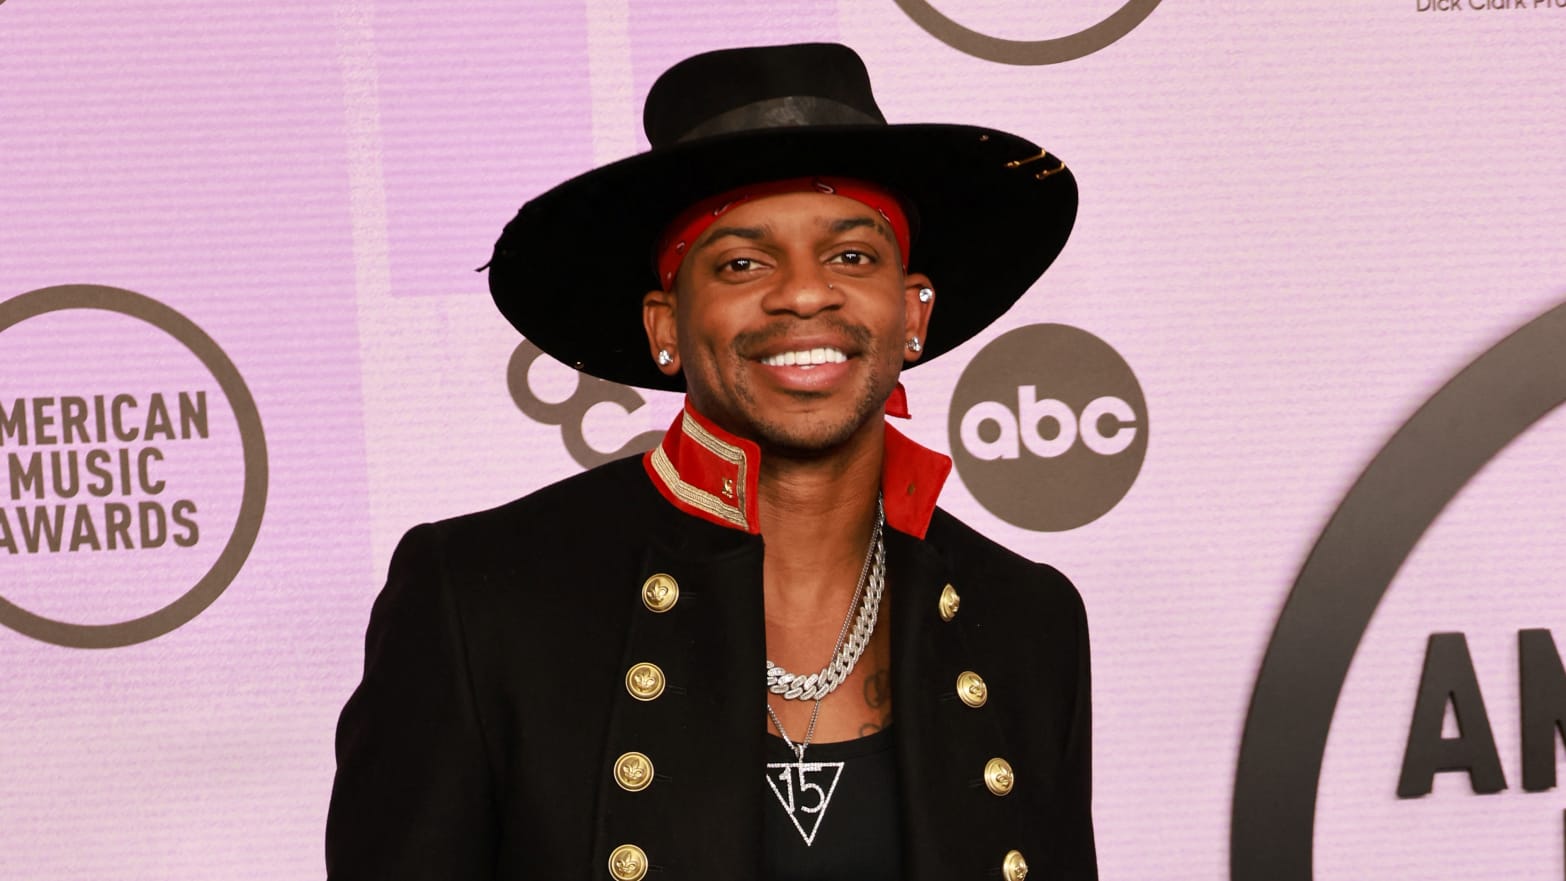 Jimmie Allen at the American Music Awards